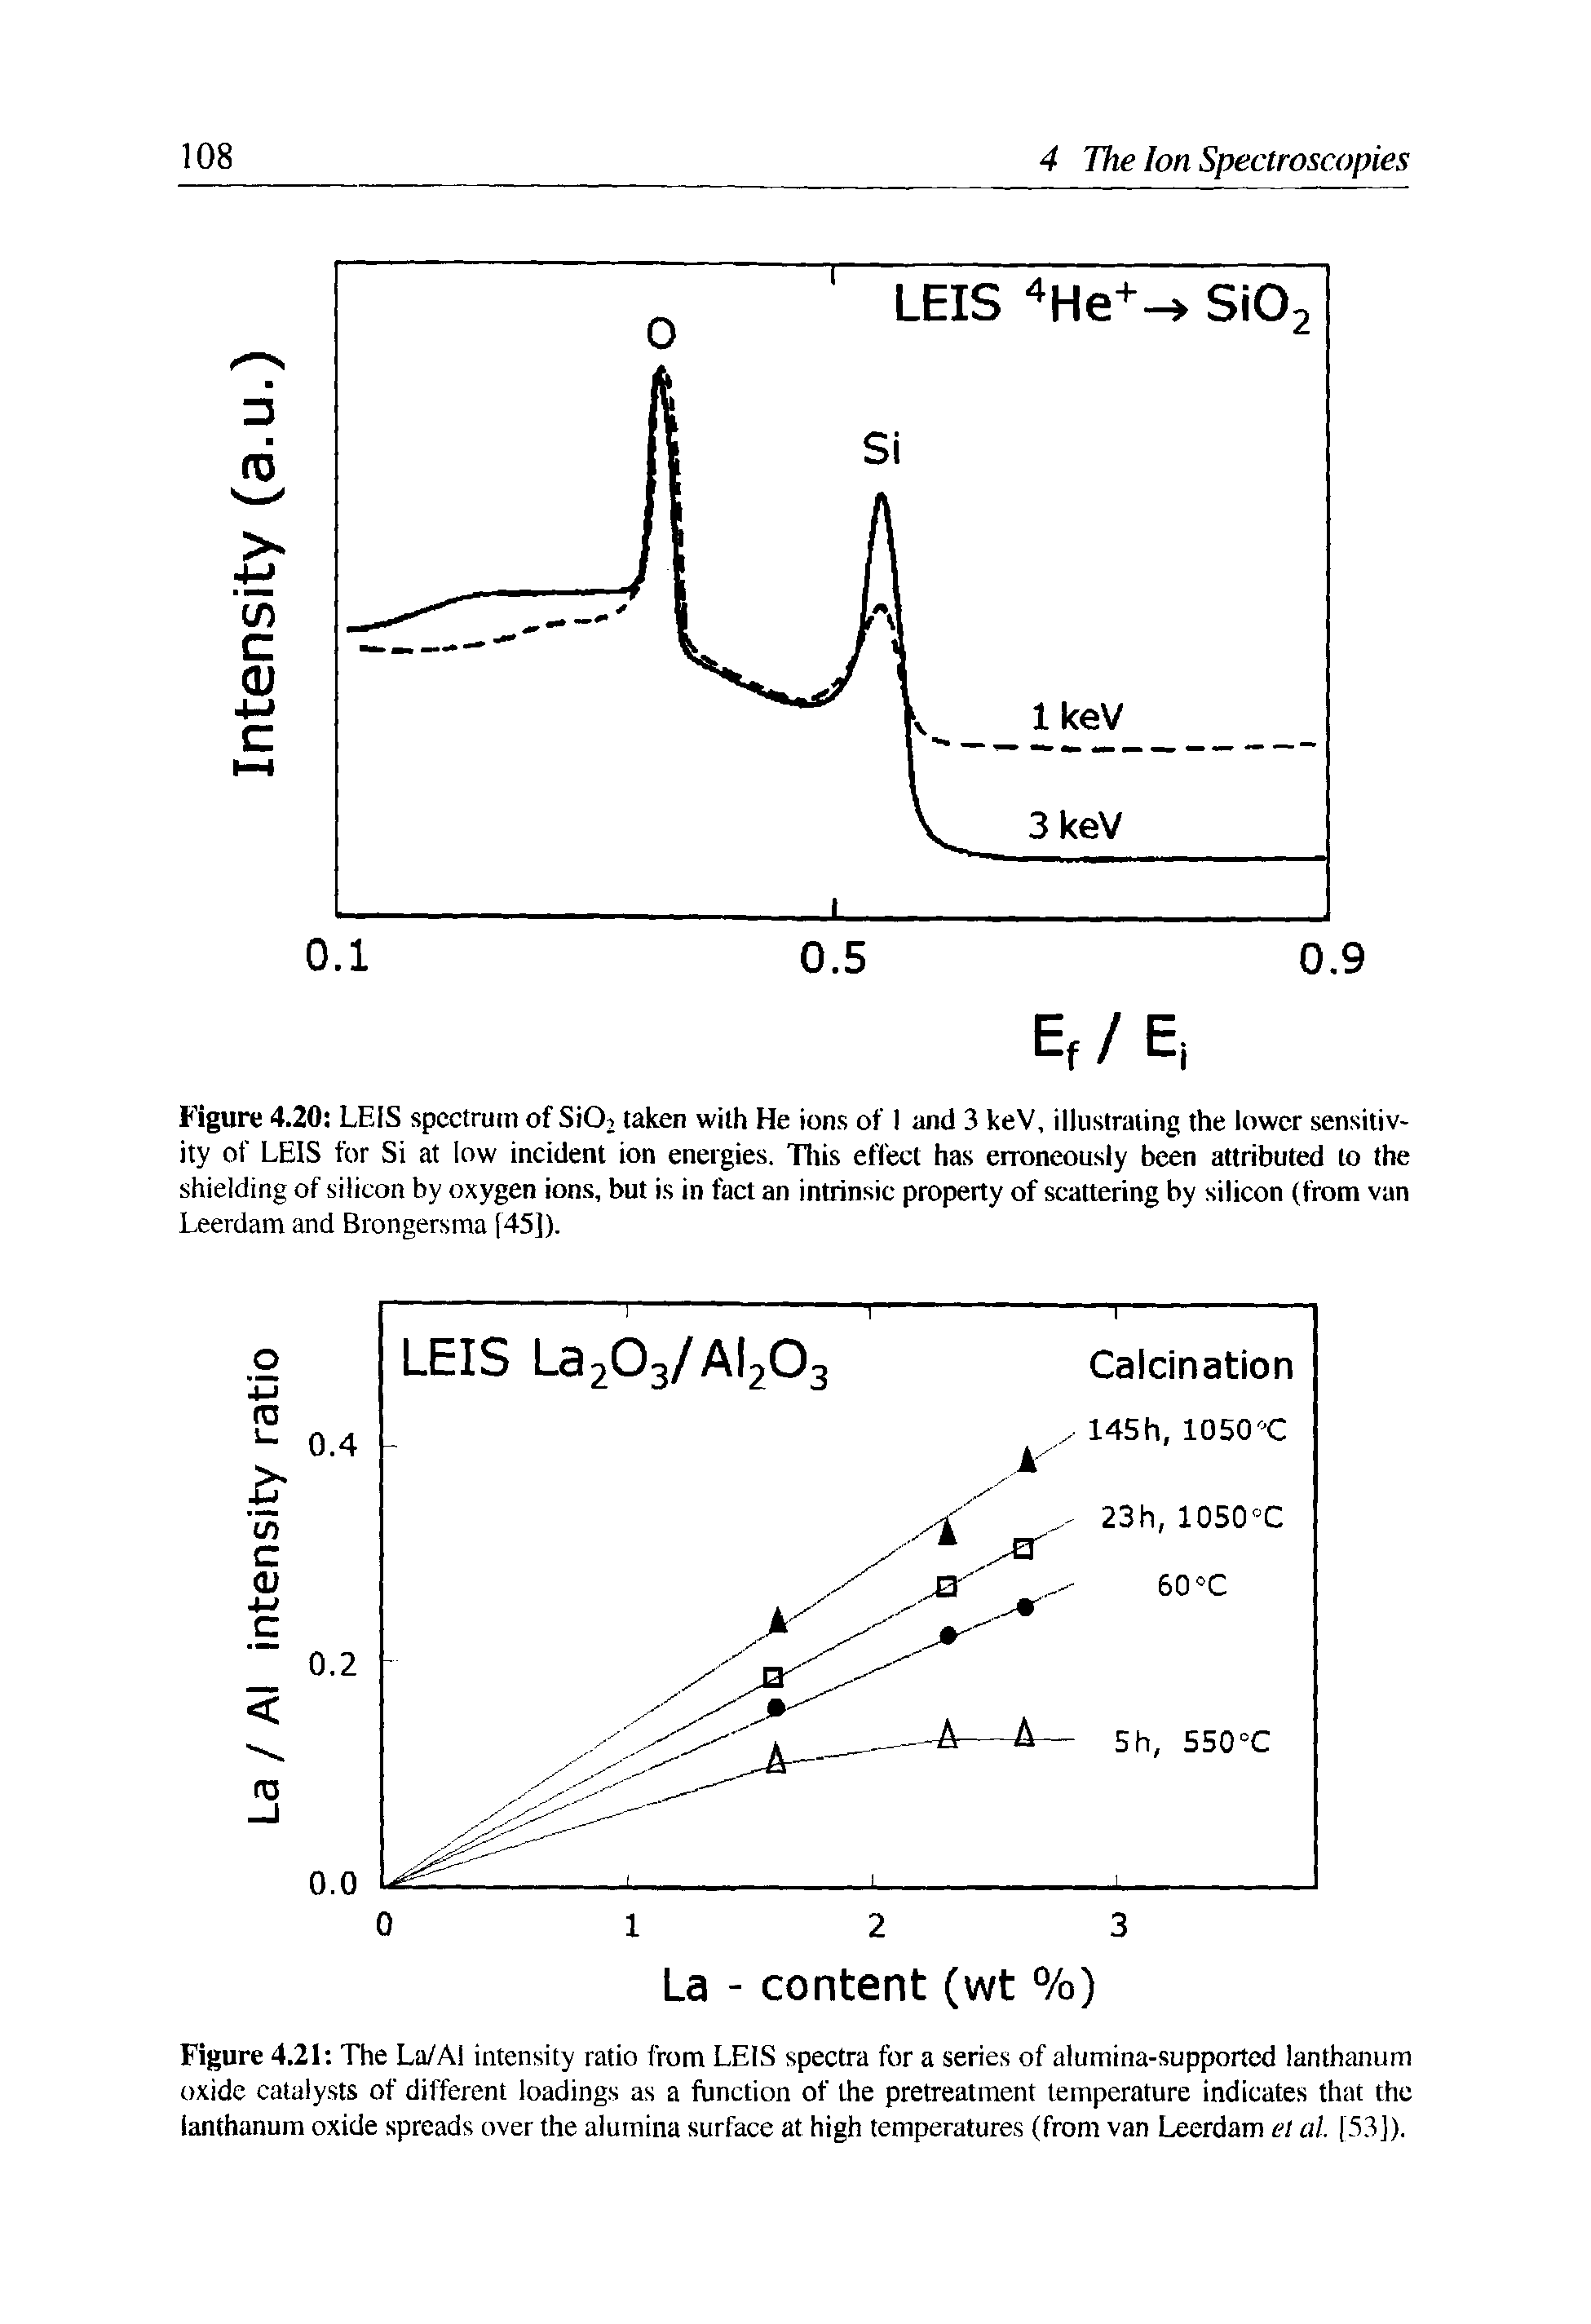 Figure 4.21 The La/Ai intensity ratio from LEIS spectra for a series of alumina-supported lanthanum oxide catalysts of different loadings as a function of the pretreatment temperature indicates that the lanthanum oxide spreads over the alumina surface at high temperatures (from van Leerdam el al. [53]).